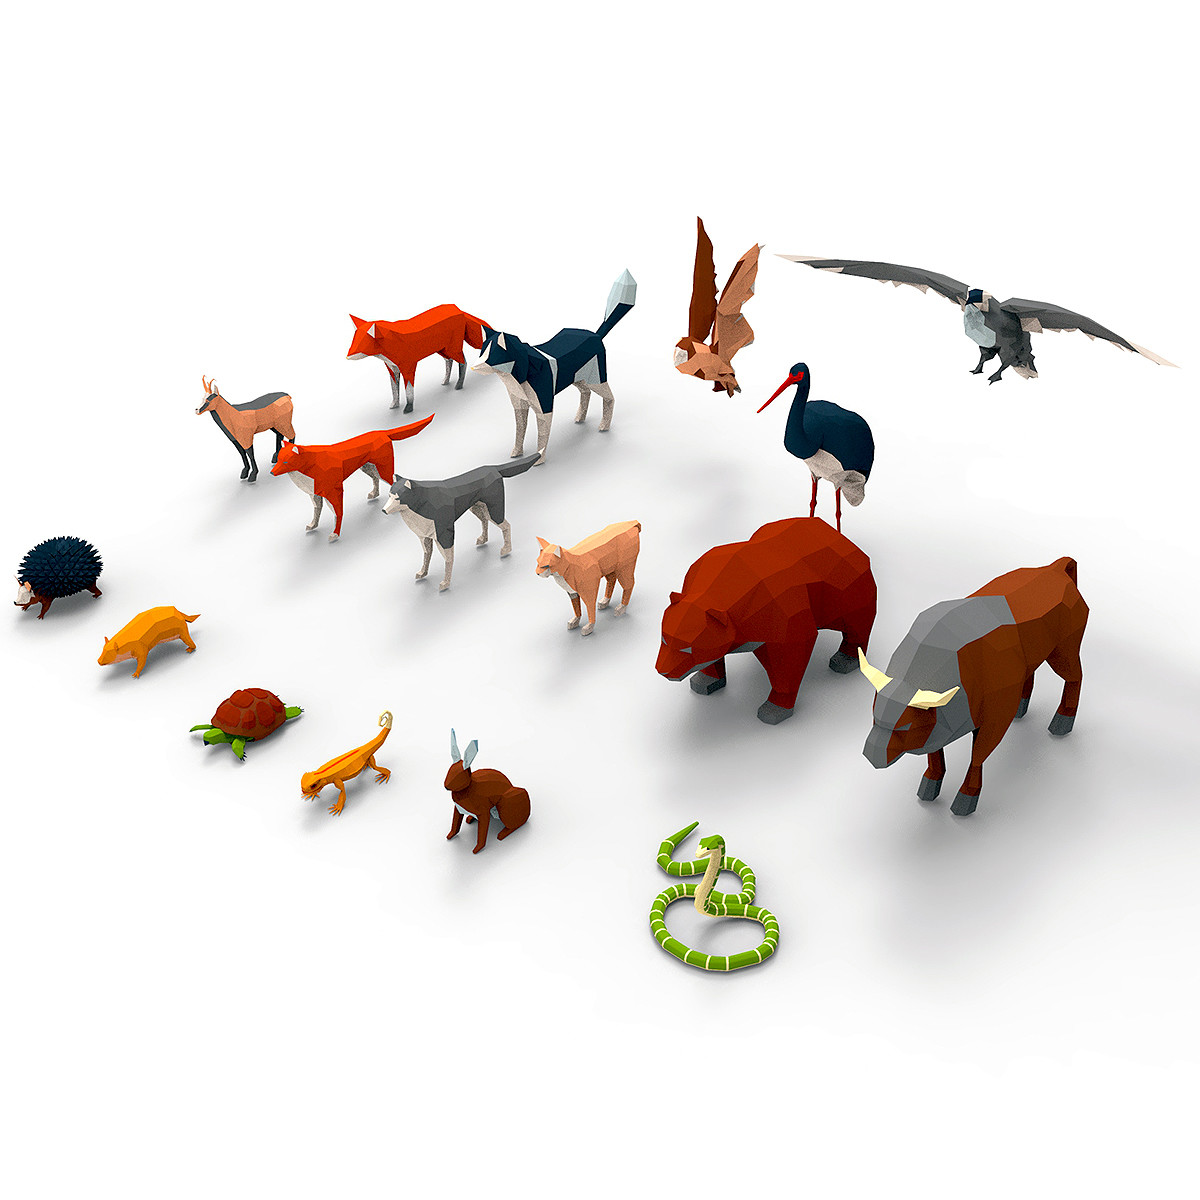 low poly animals